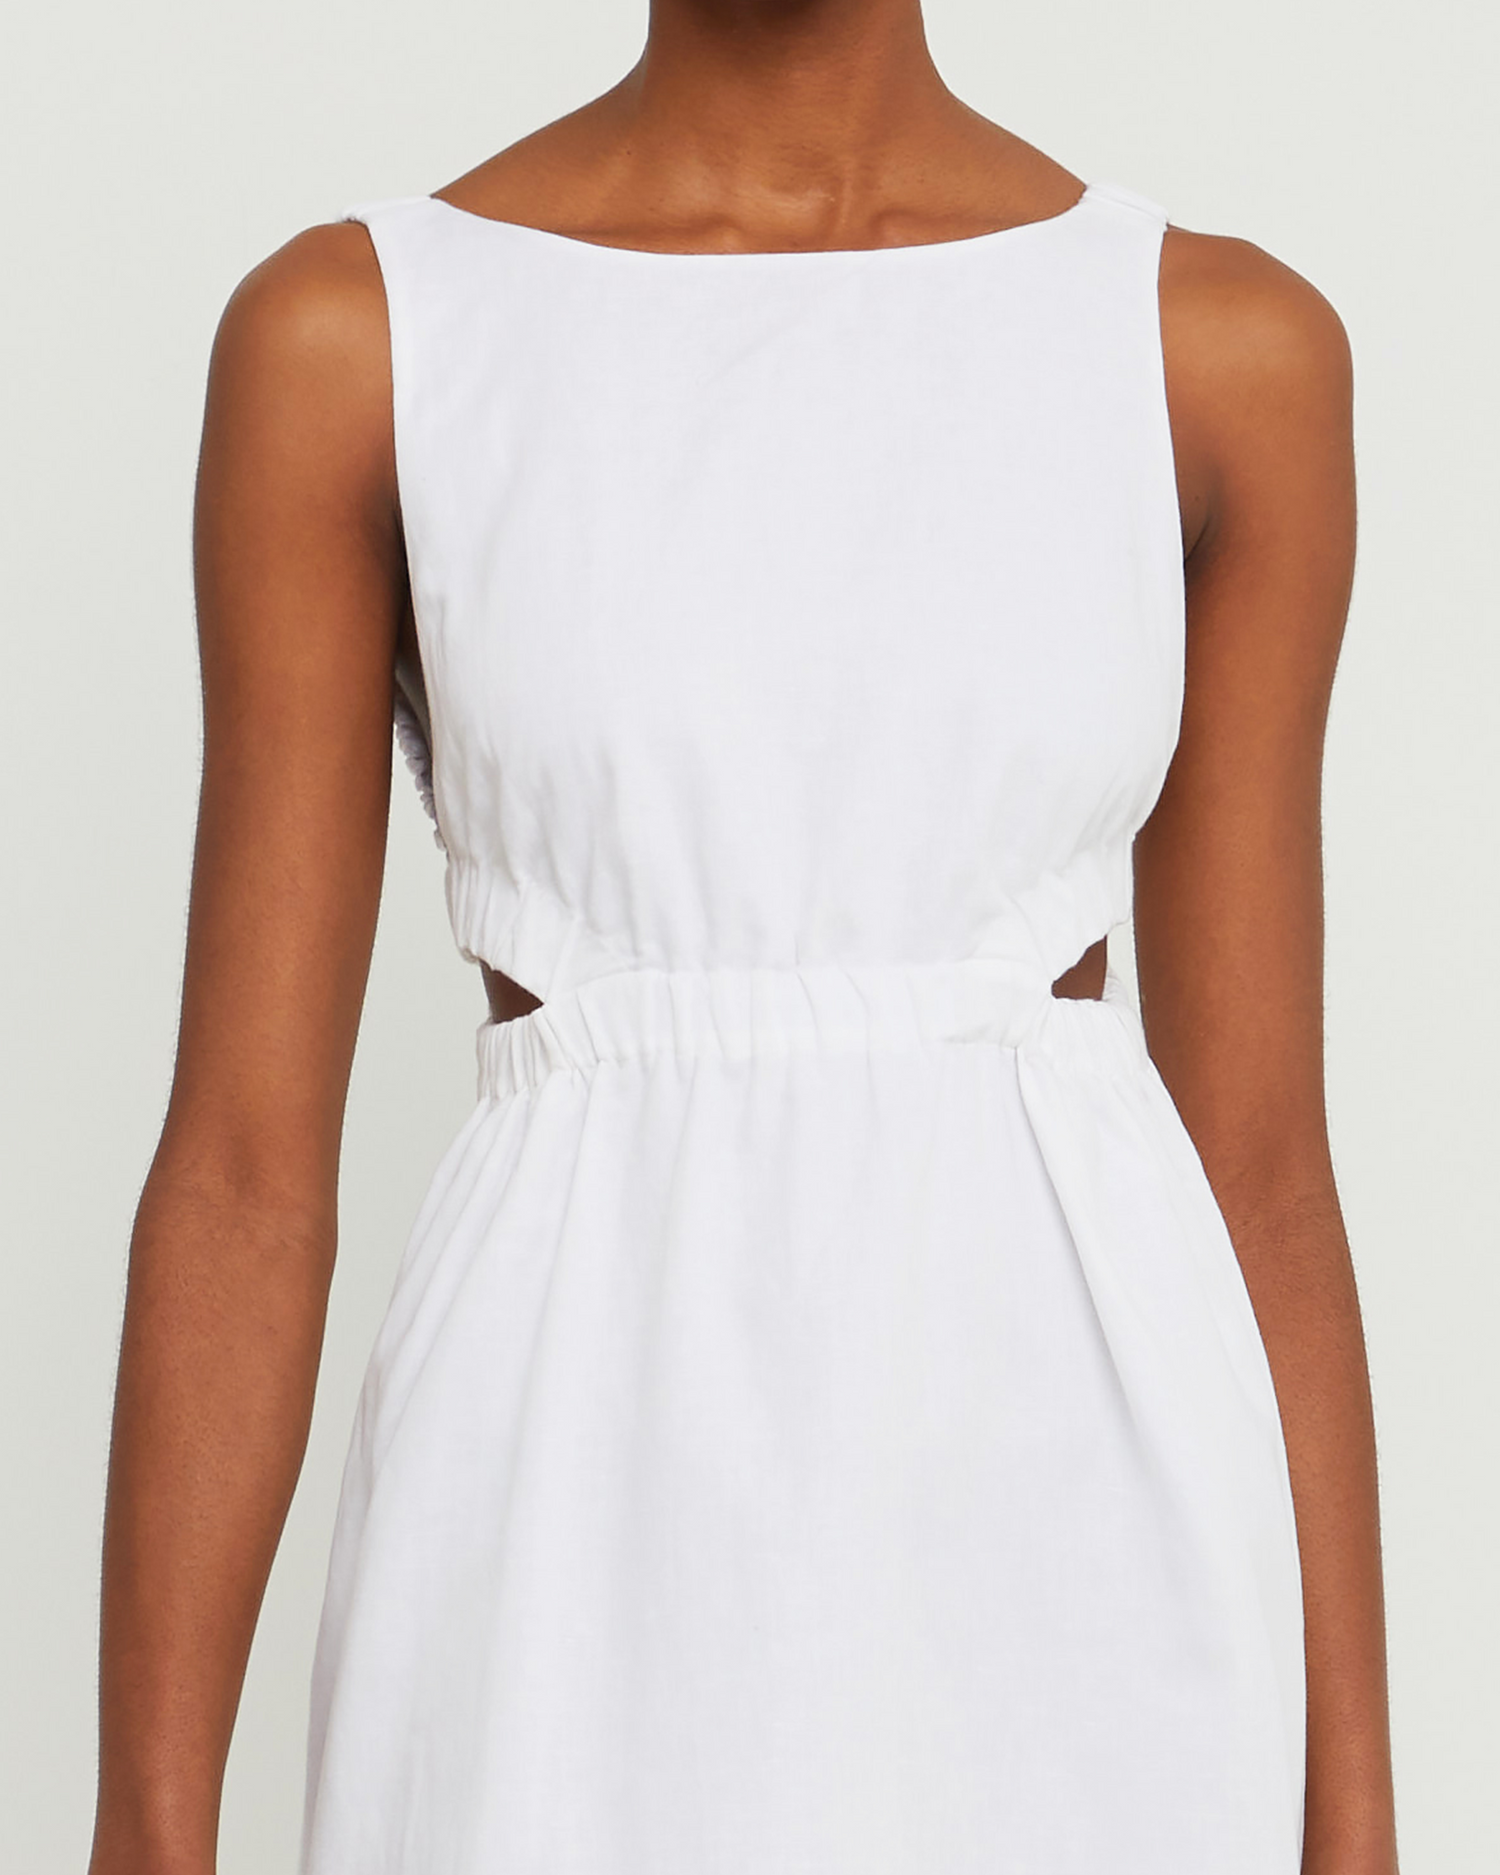 Sixth image of Aubrielle Dress, a white midi dress, open back, cut out, high neckline, sleeveless